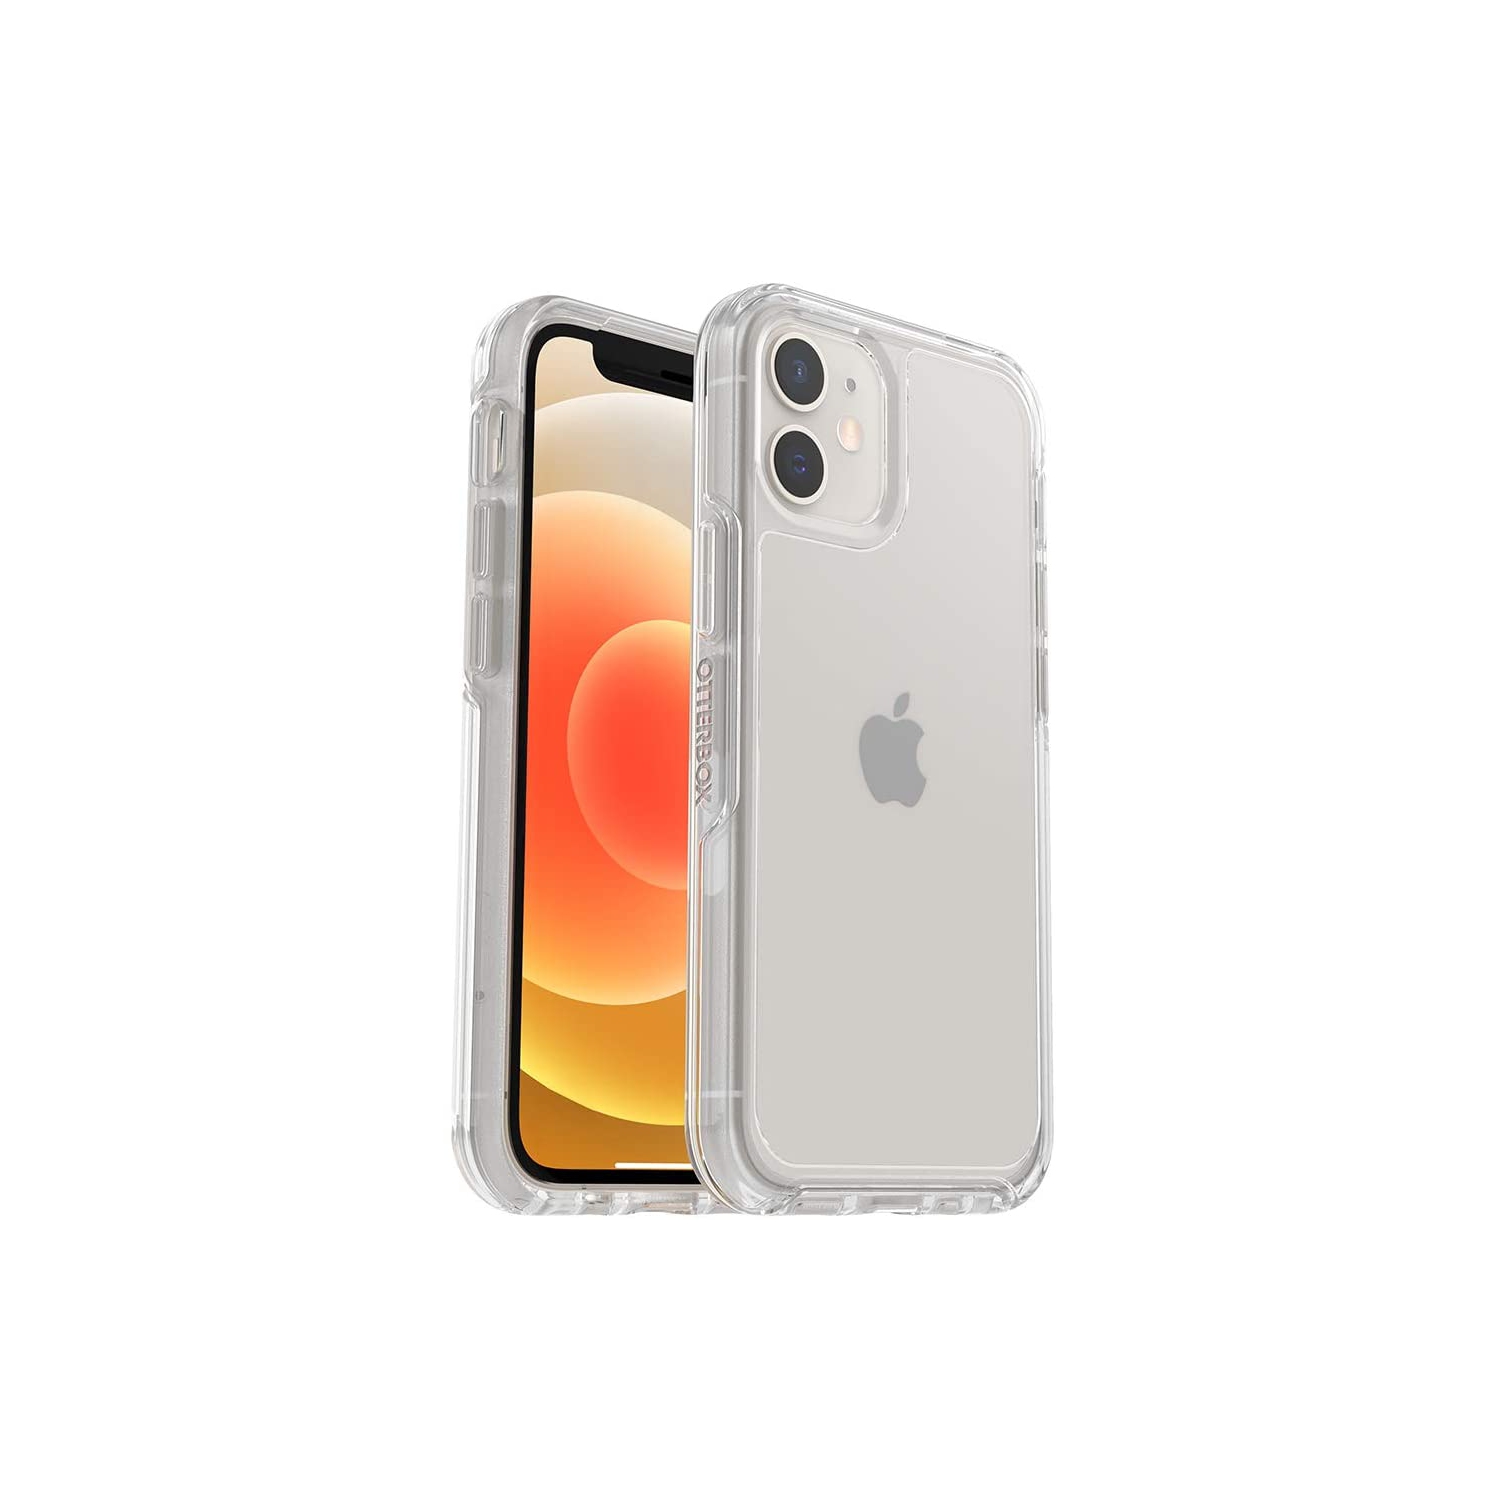 OtterBox Symmetry Fitted Hard Shell Case for iPhone 12 Mini - Clear - Open Box